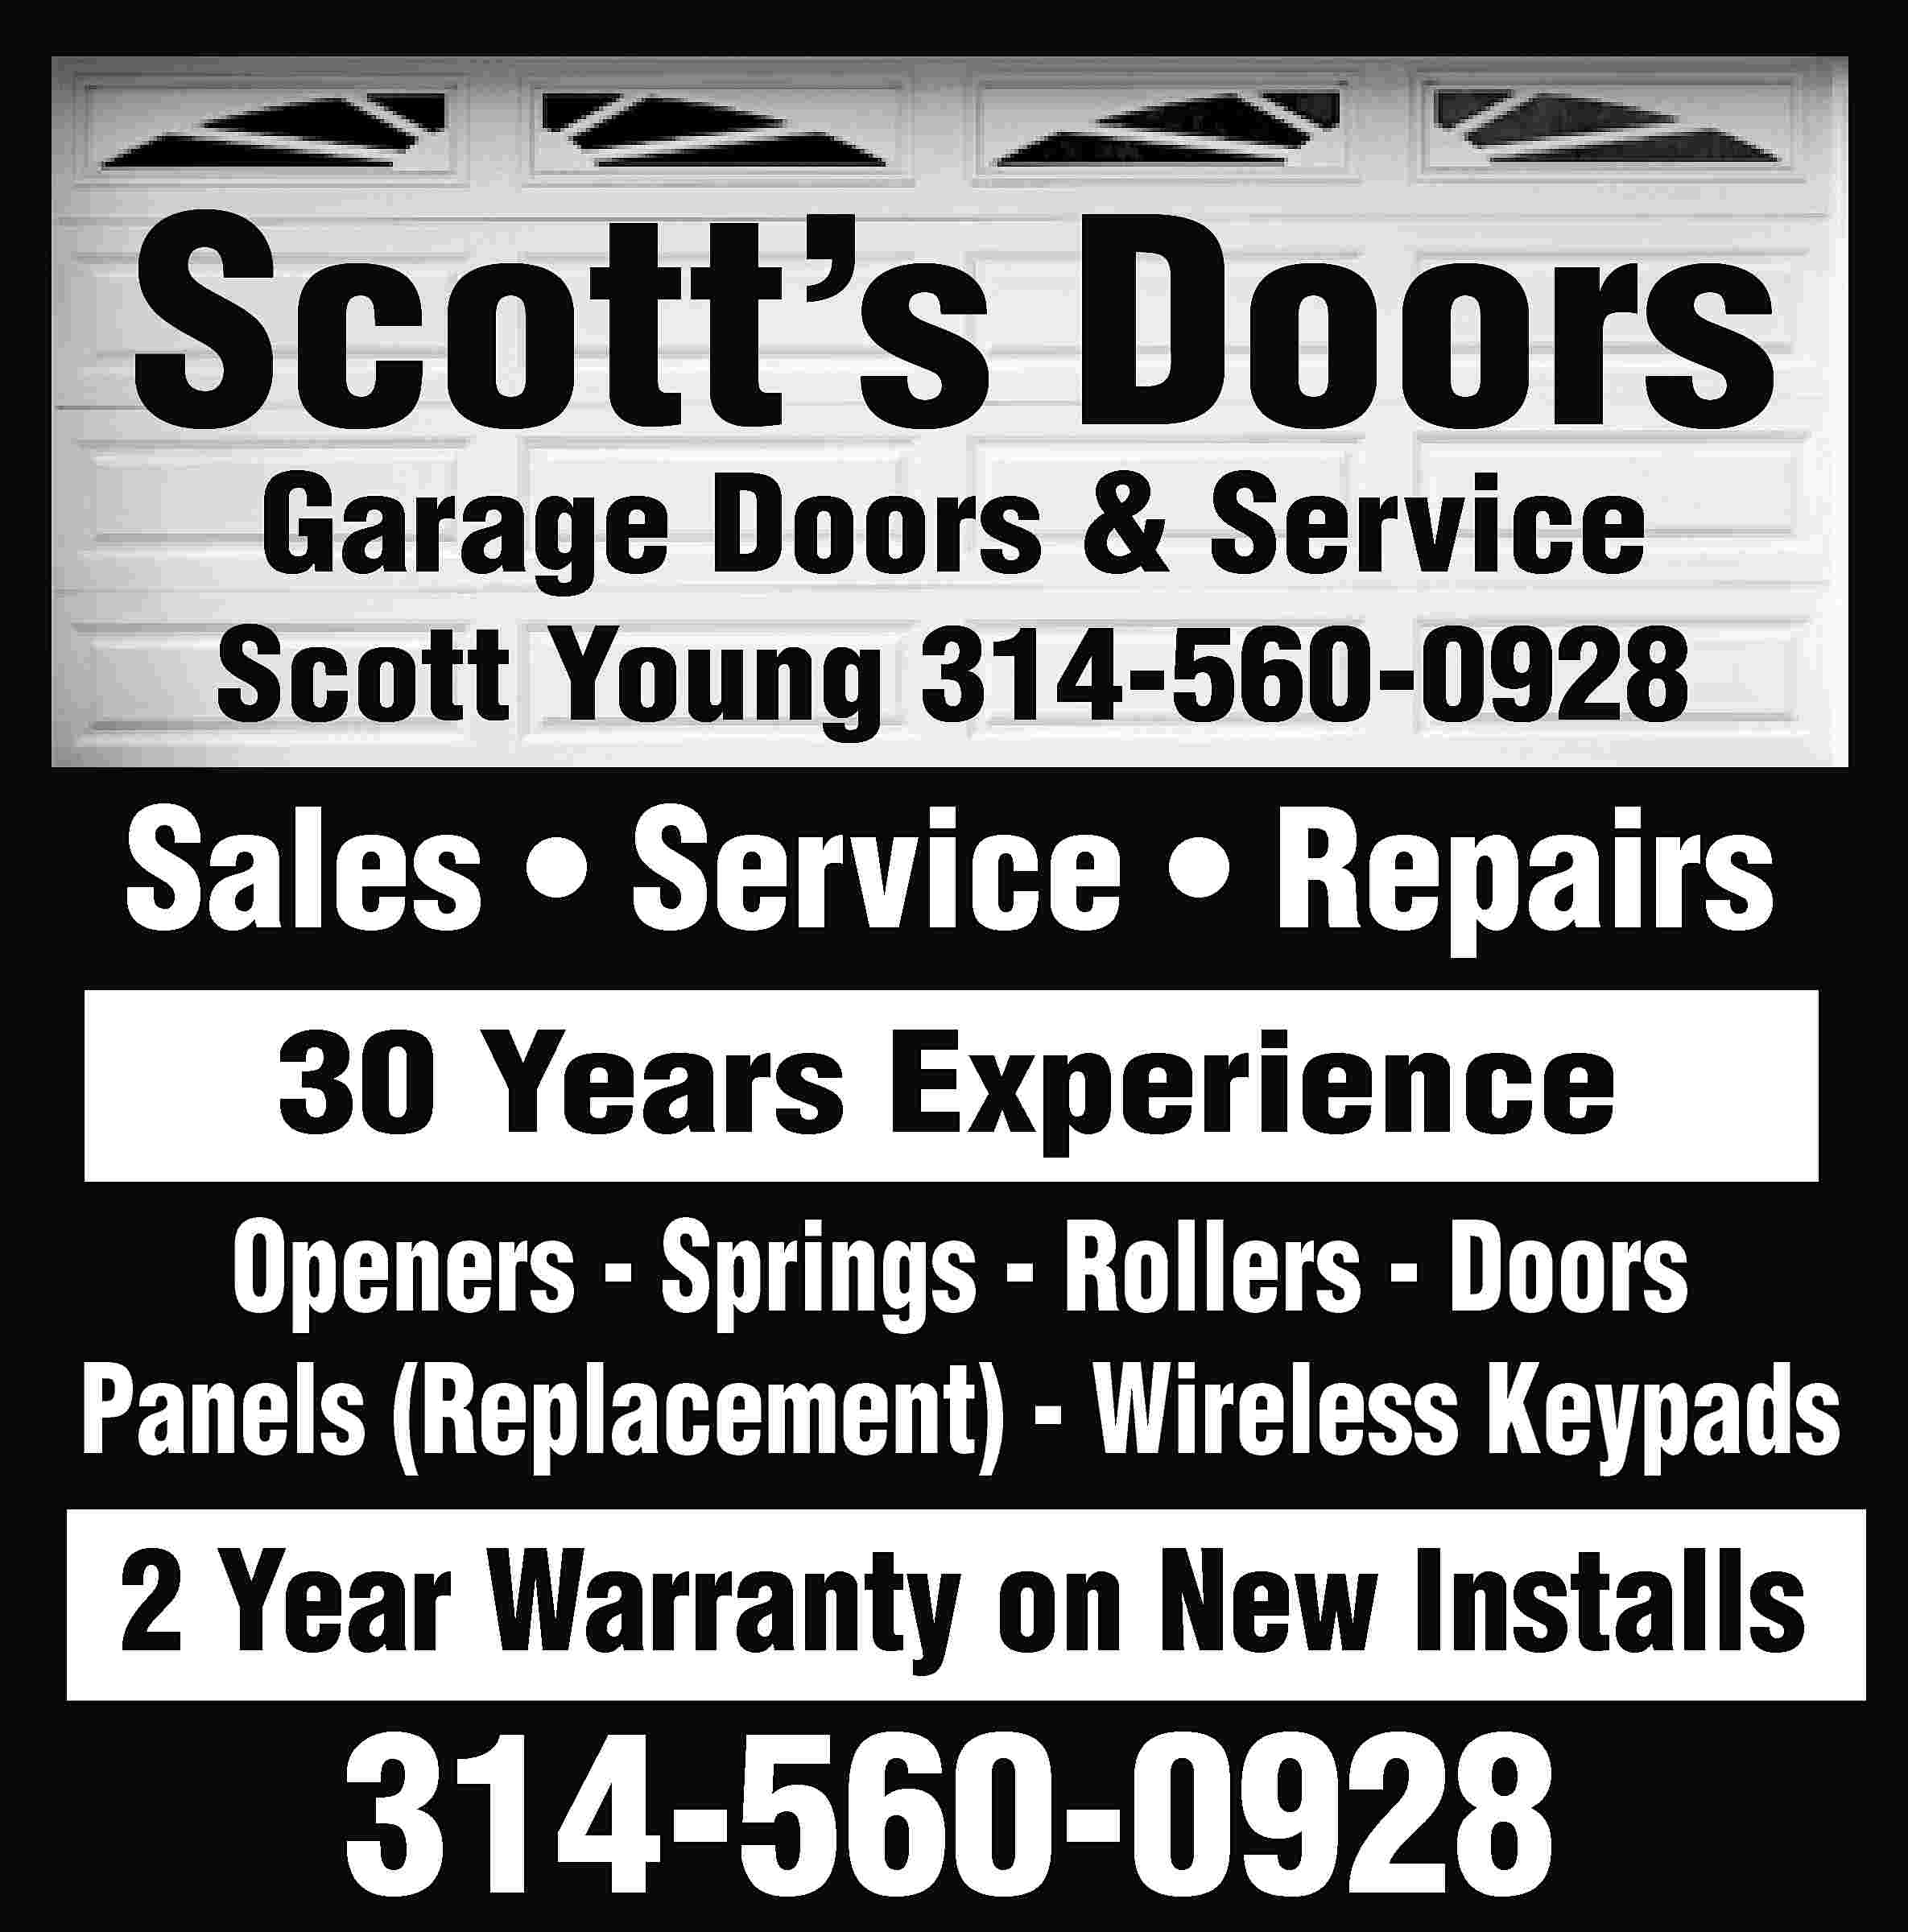 Scott’s Doors Garage Doors &  Scott’s Doors Garage Doors & Service Scott Young 314-560-0928 Sales • Service • Repairs 30 Years Experience Openers - Springs - Rollers - Doors Panels (Replacement) - Wireless Keypads 2 Year Warranty on New Installs 314-560-0928